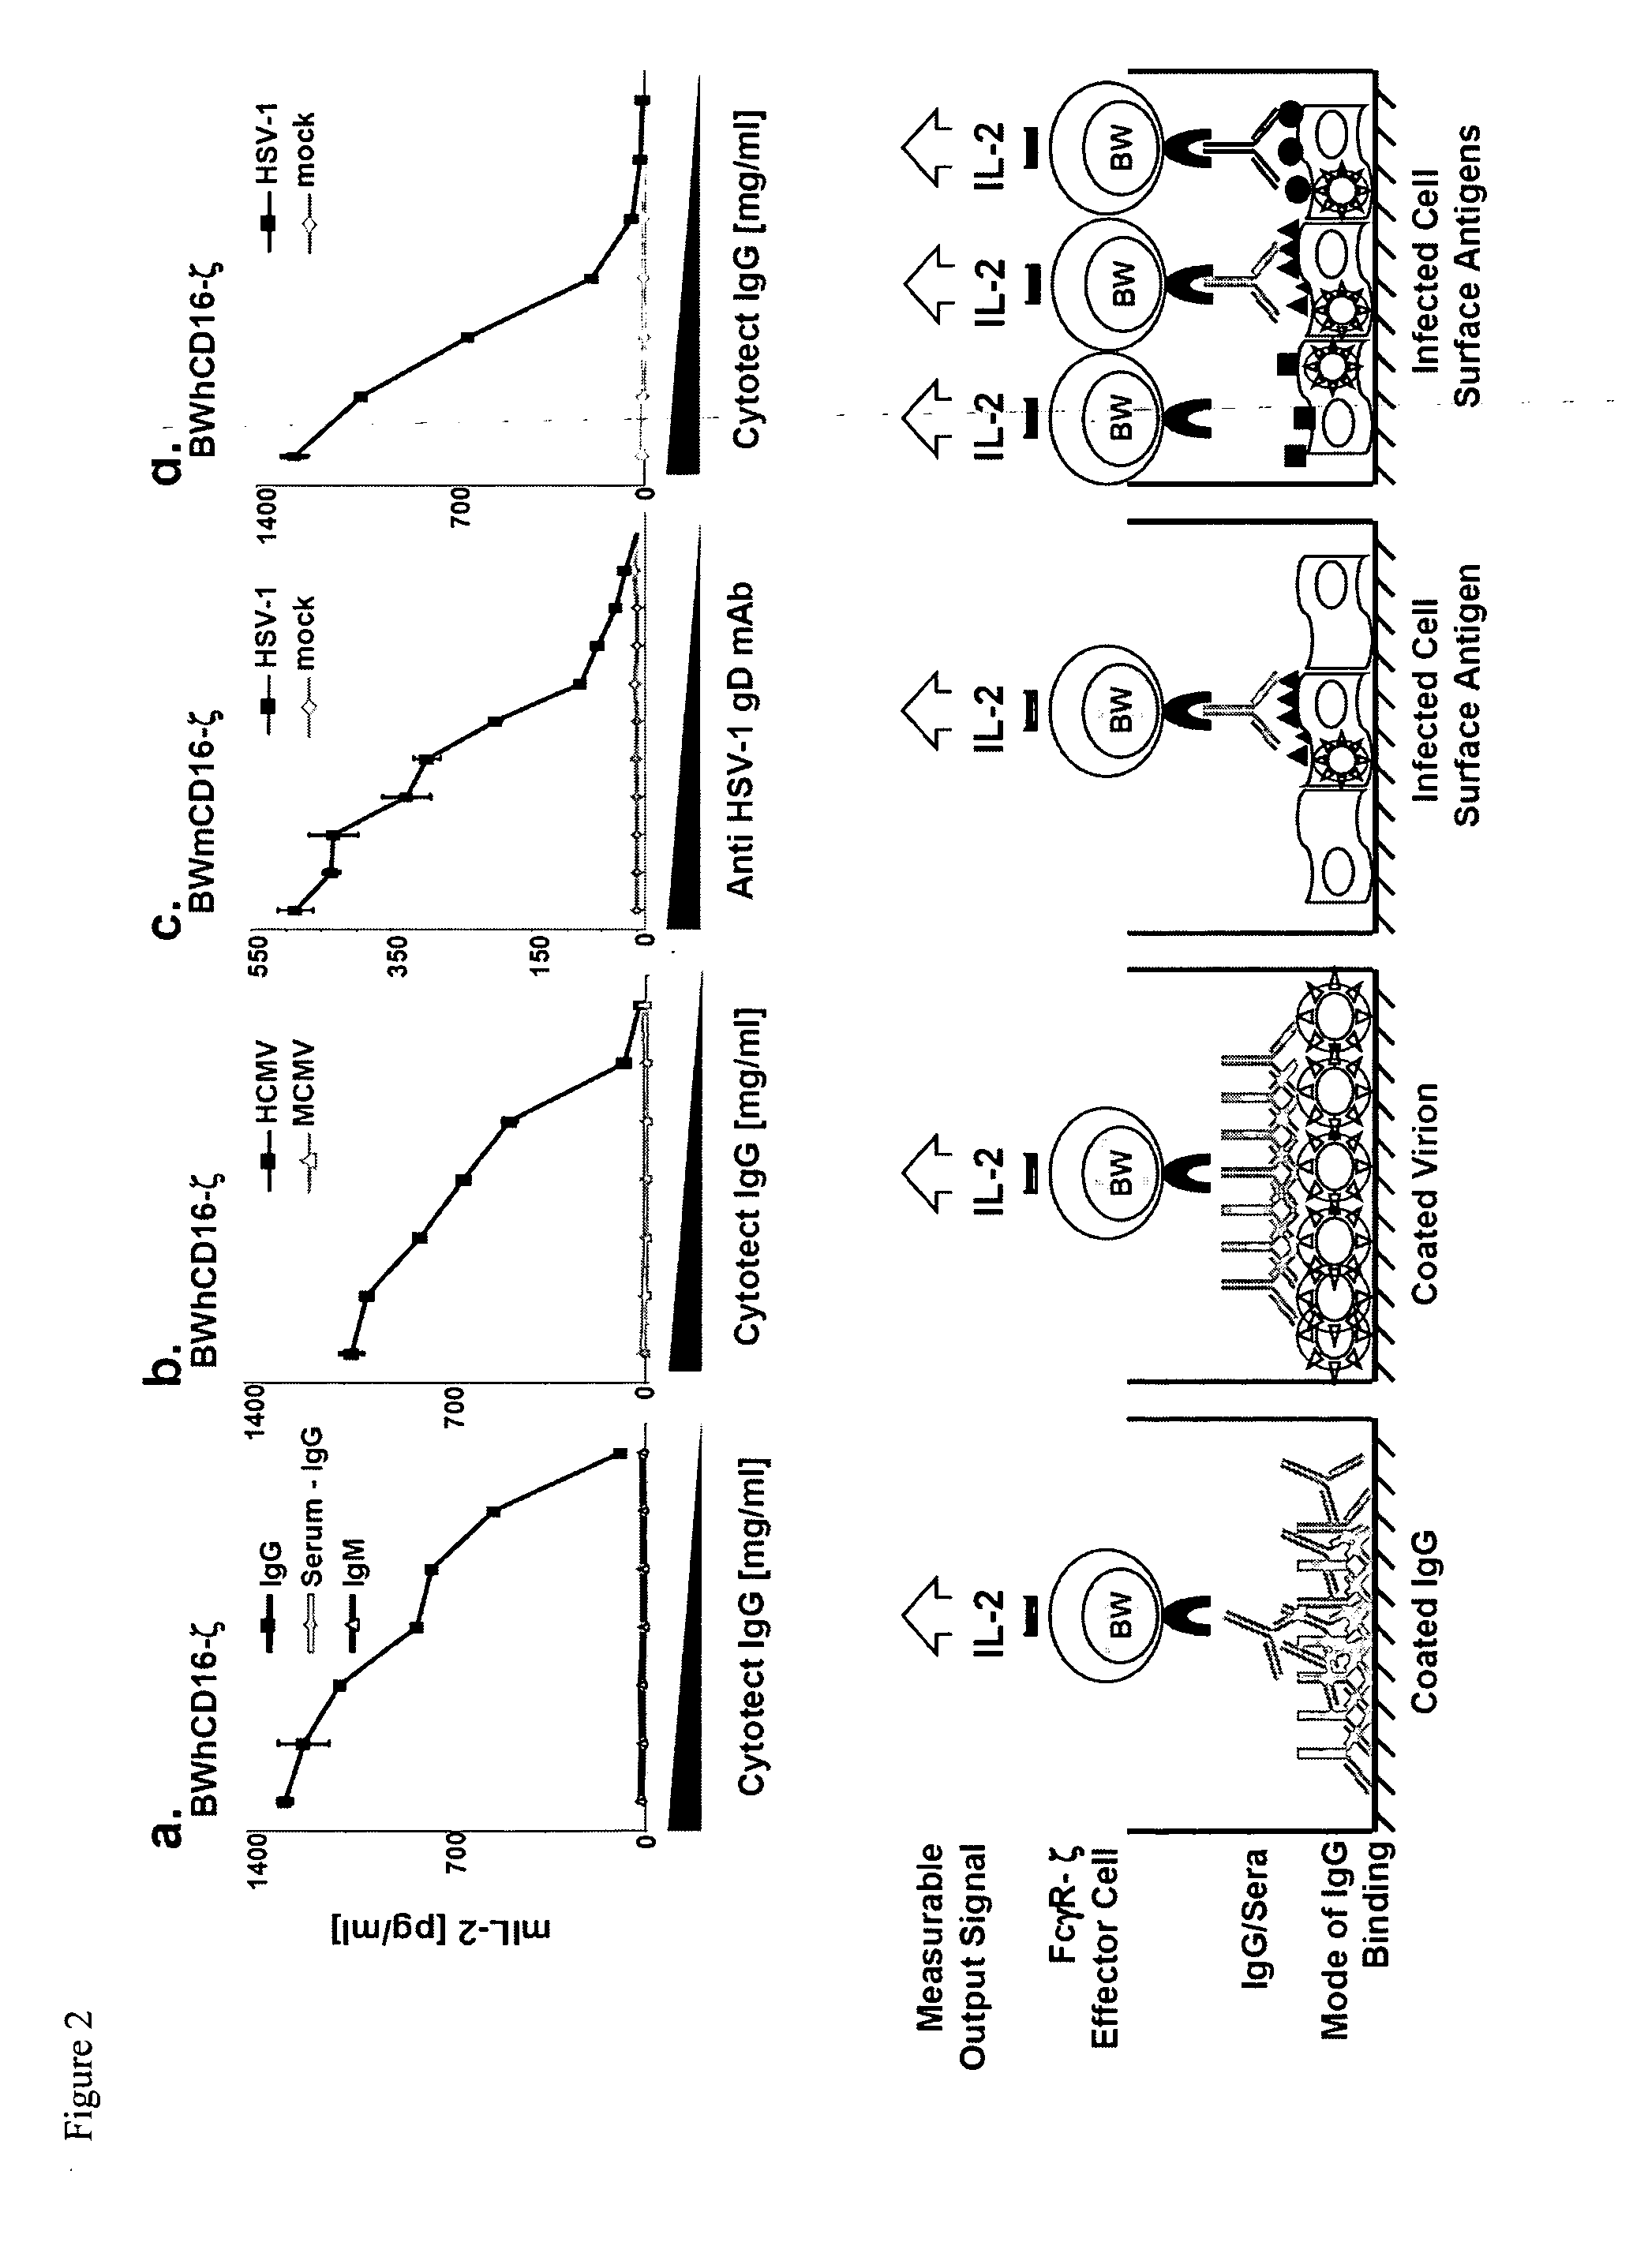 Determination of Interactions of Constant Parts of Antibodies with FC-Gamma Receptors